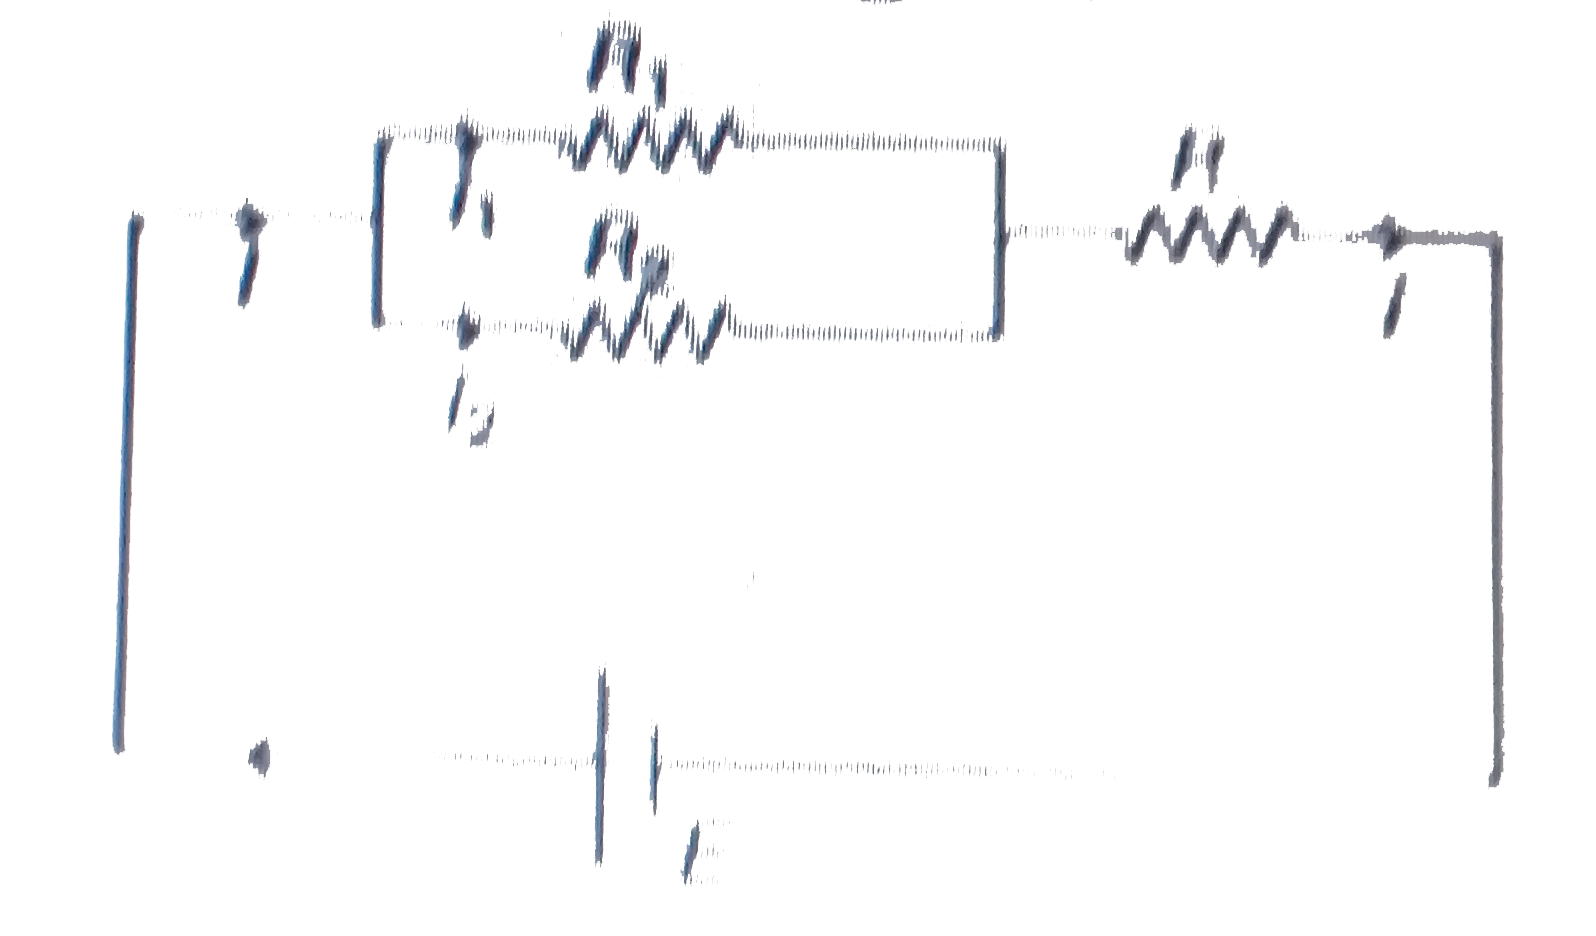 In the circuit shown in figure, the ratio